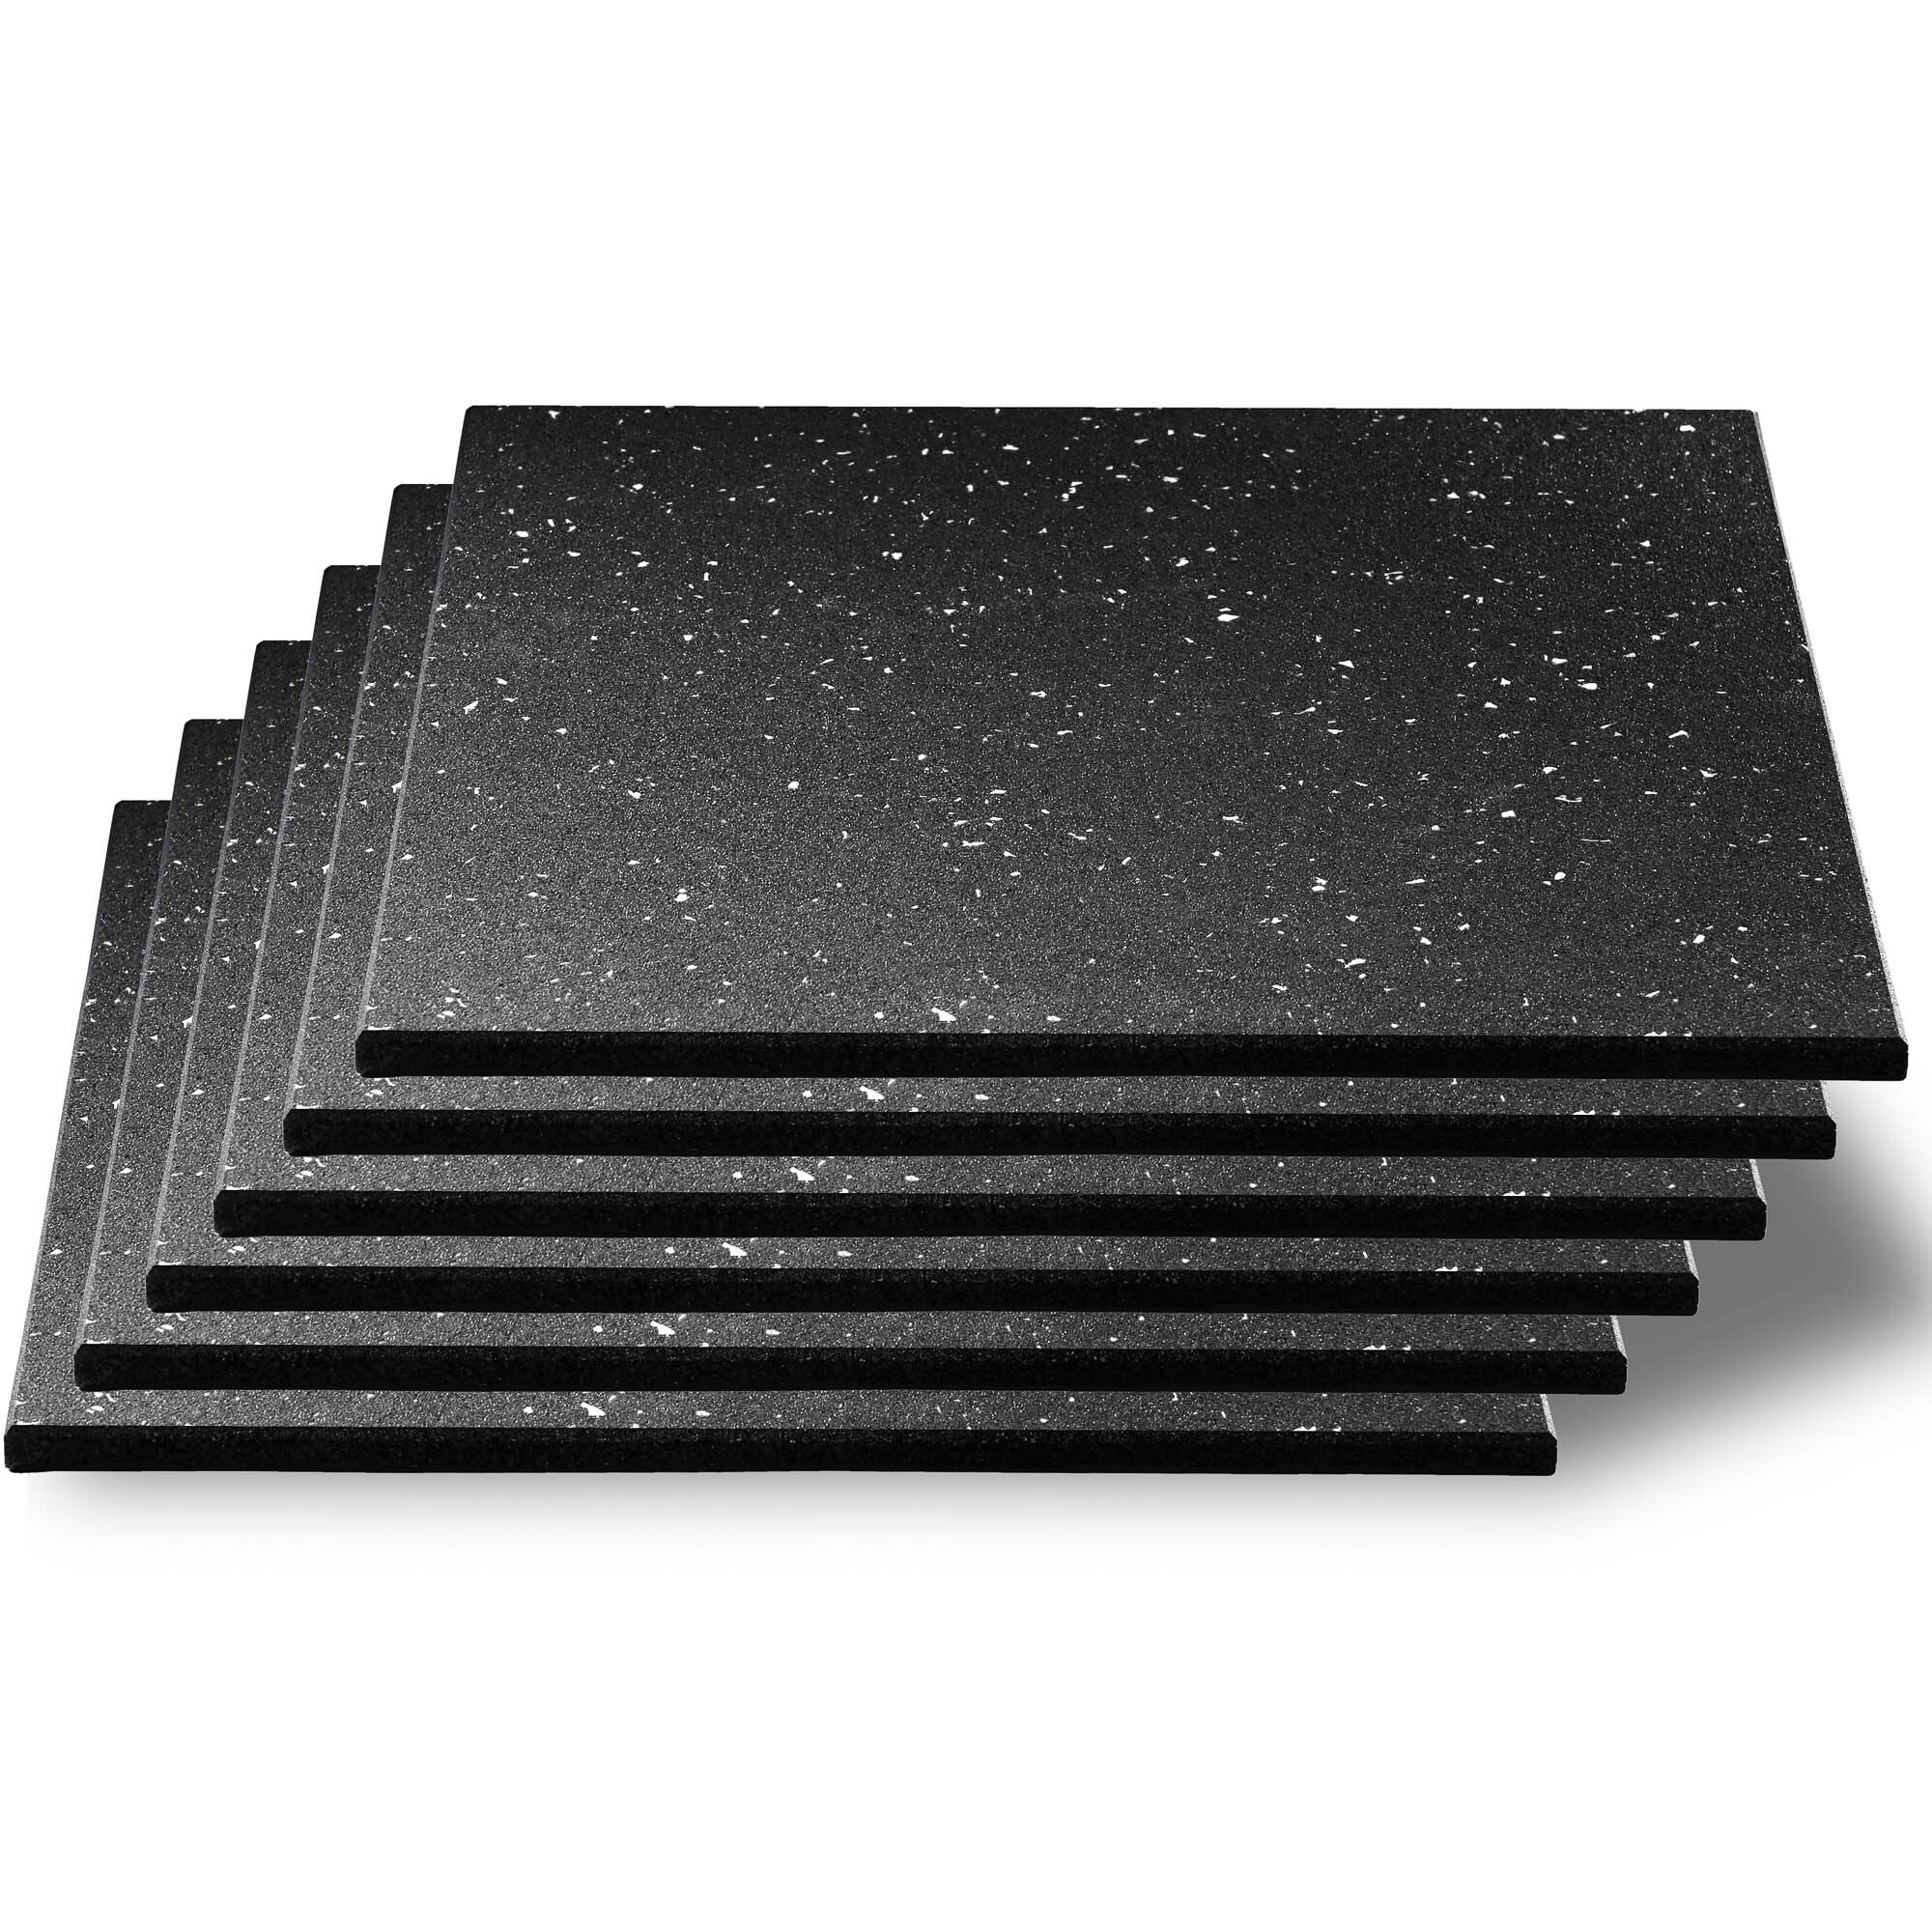 CD 15mm Thick High-Density Gym Floor Protection Mats Tiles - 6 Pack 500x500mm Rubber Exercise Workout Equipment Mat - Noise & Shock Absorbing - B&W